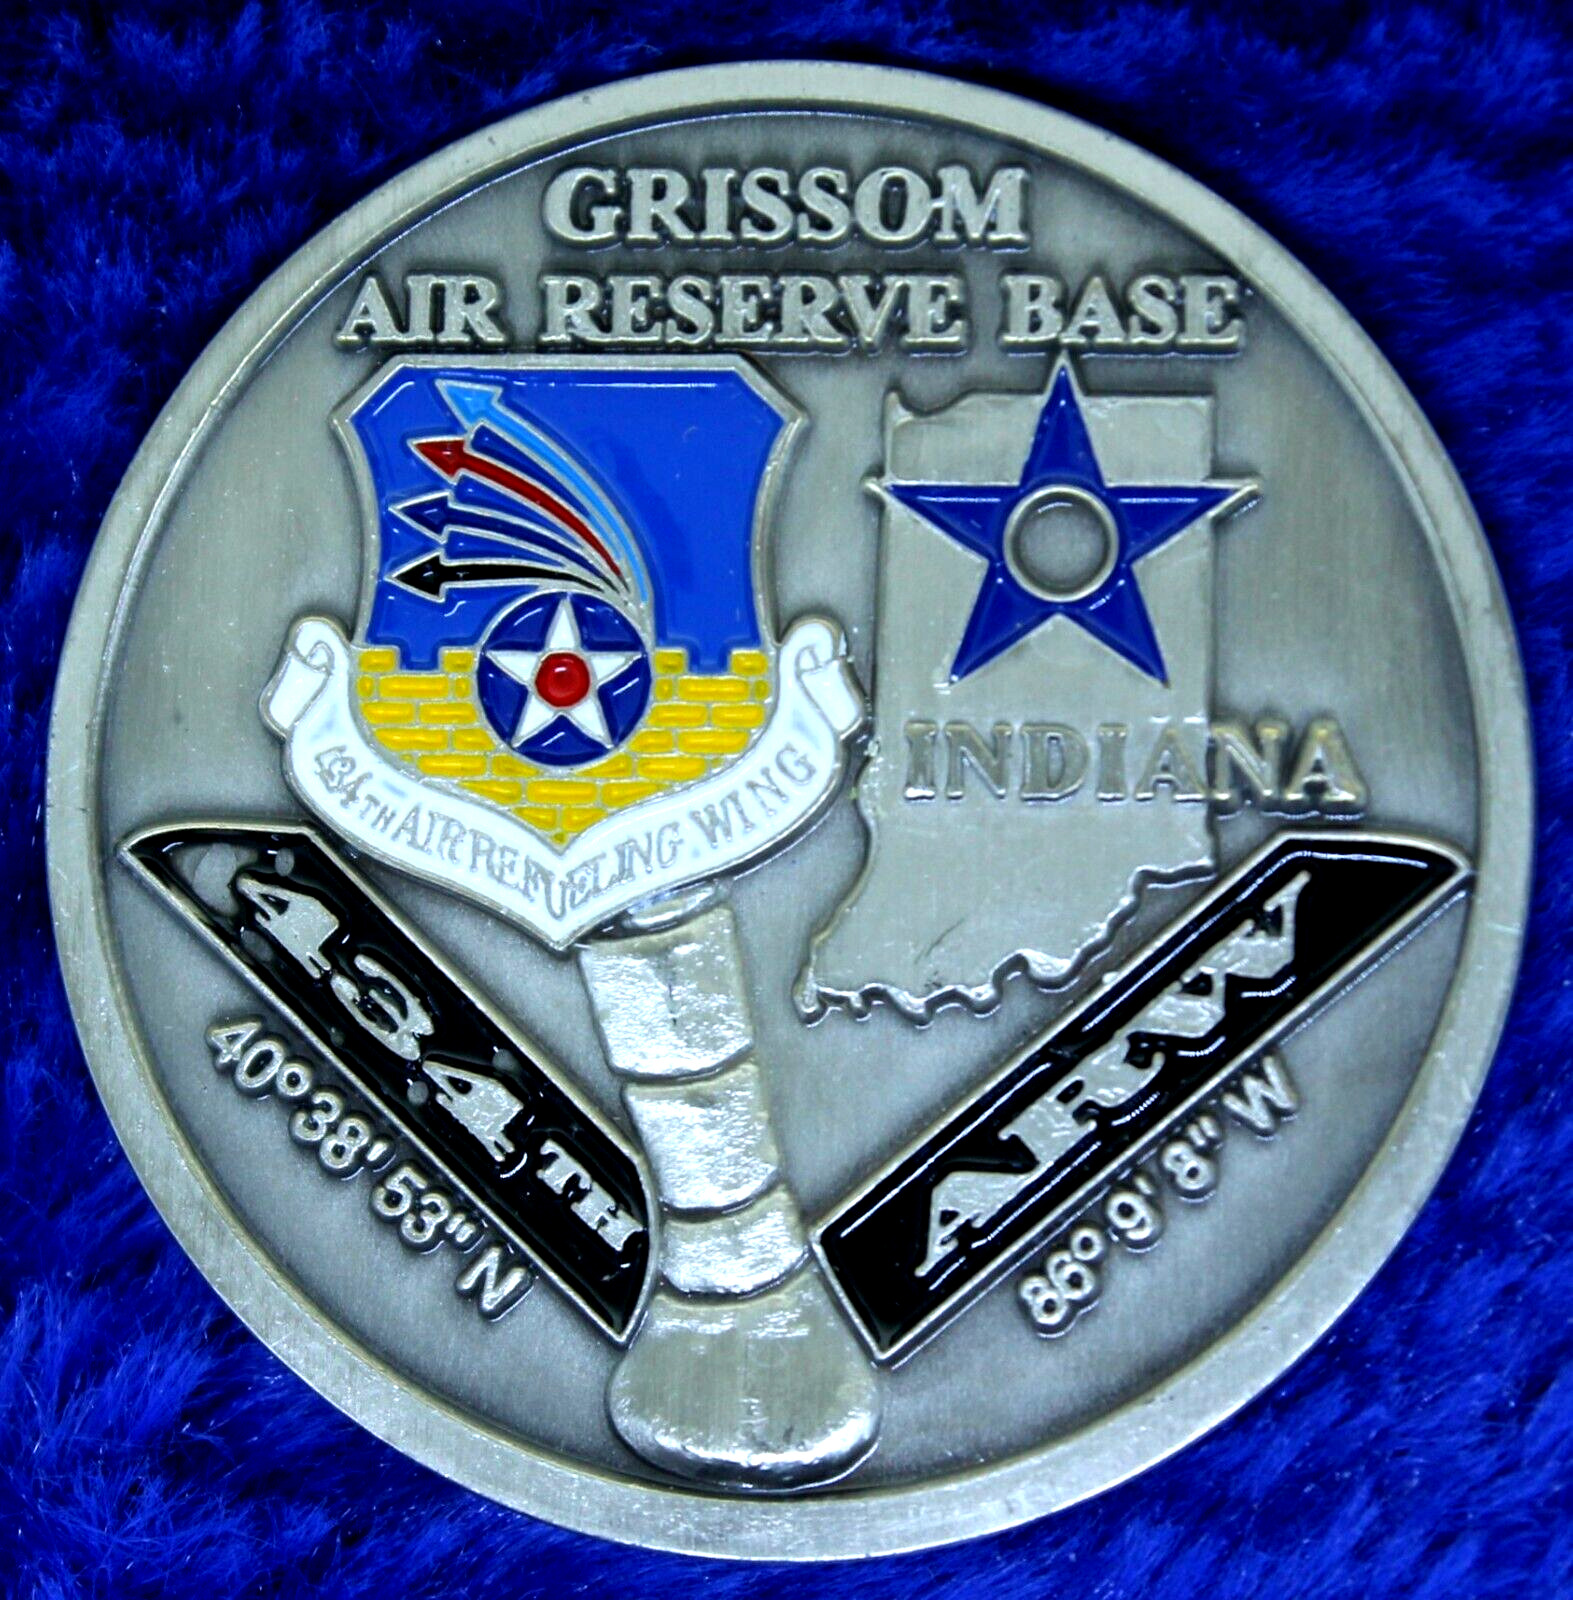 USAF Grissom Air Reserve Base 434th Air Refueling Wing Challenge Coin PT-17